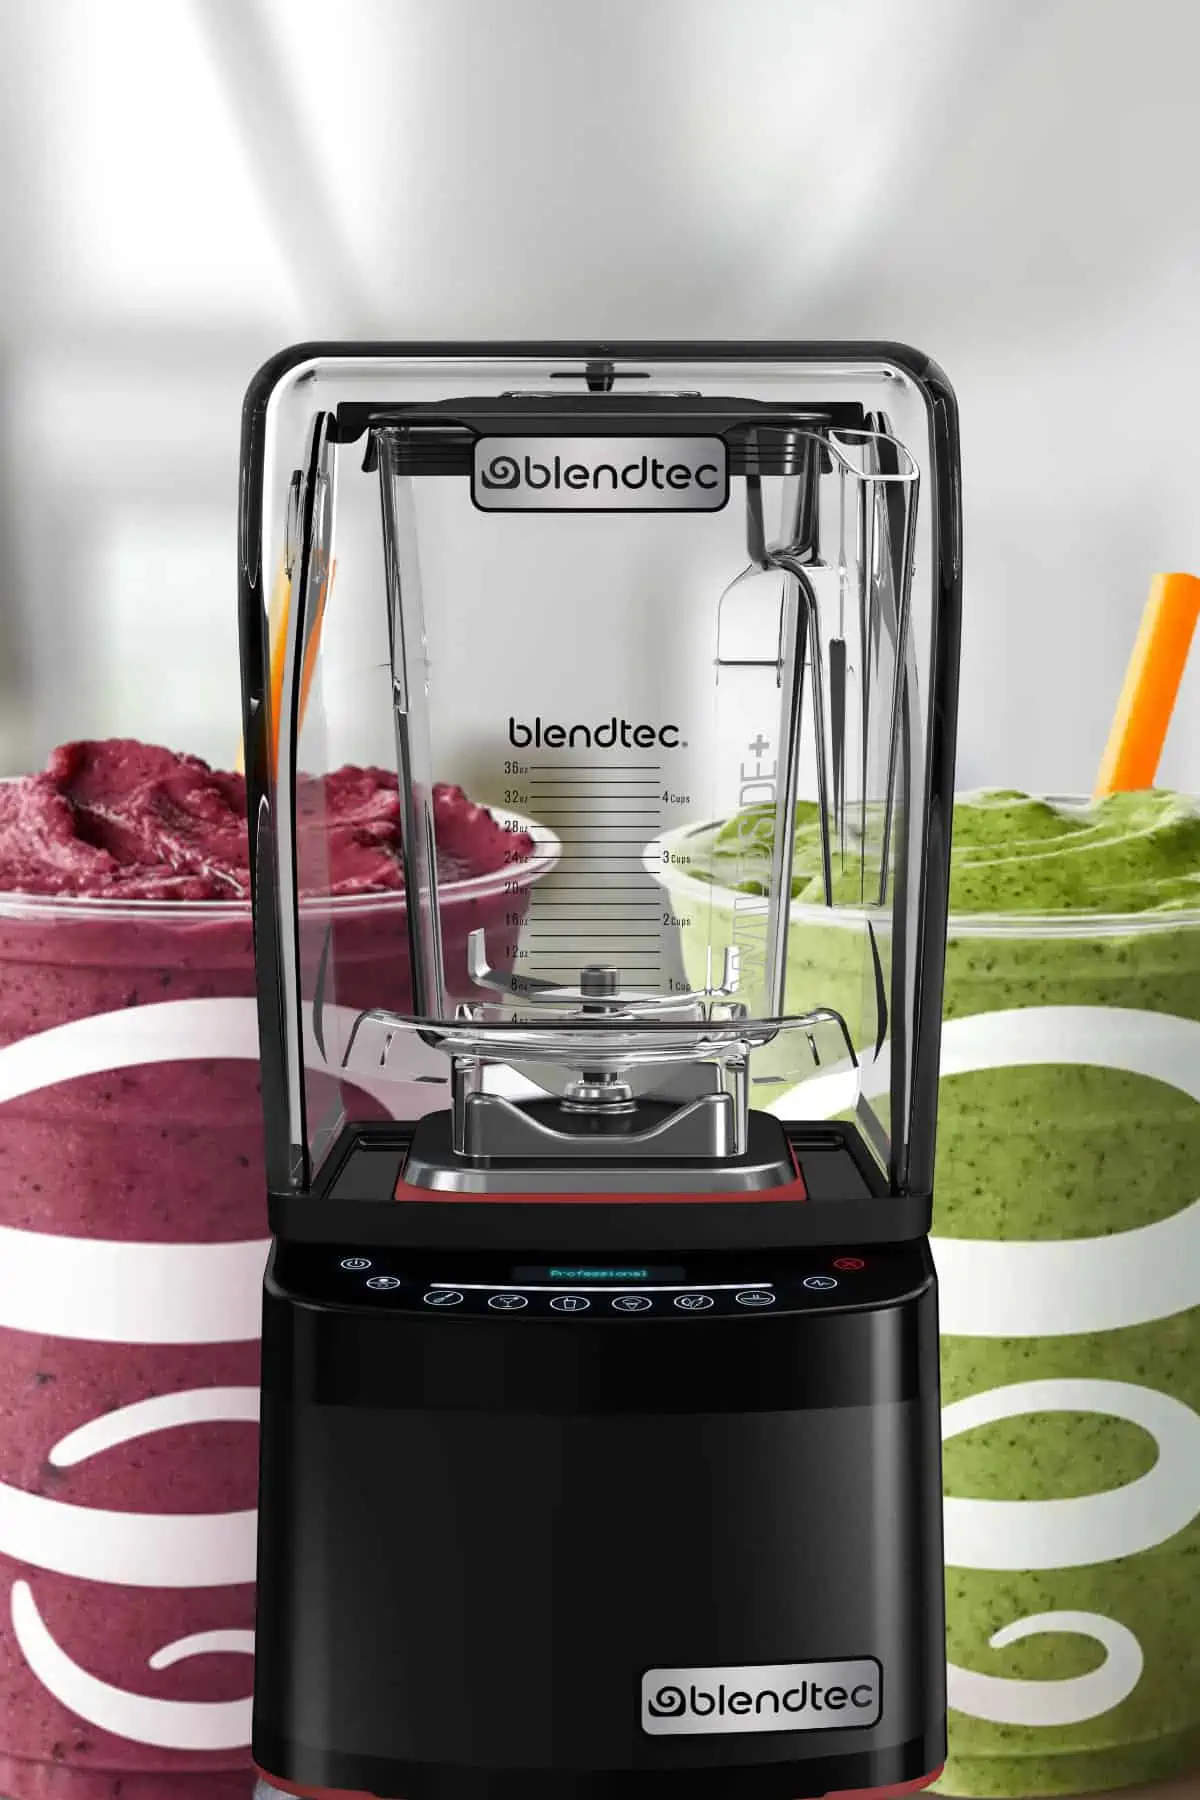 Blendtec Stealth blender, on my kitchen counter, surrounded by Jamba Juice smoothies.